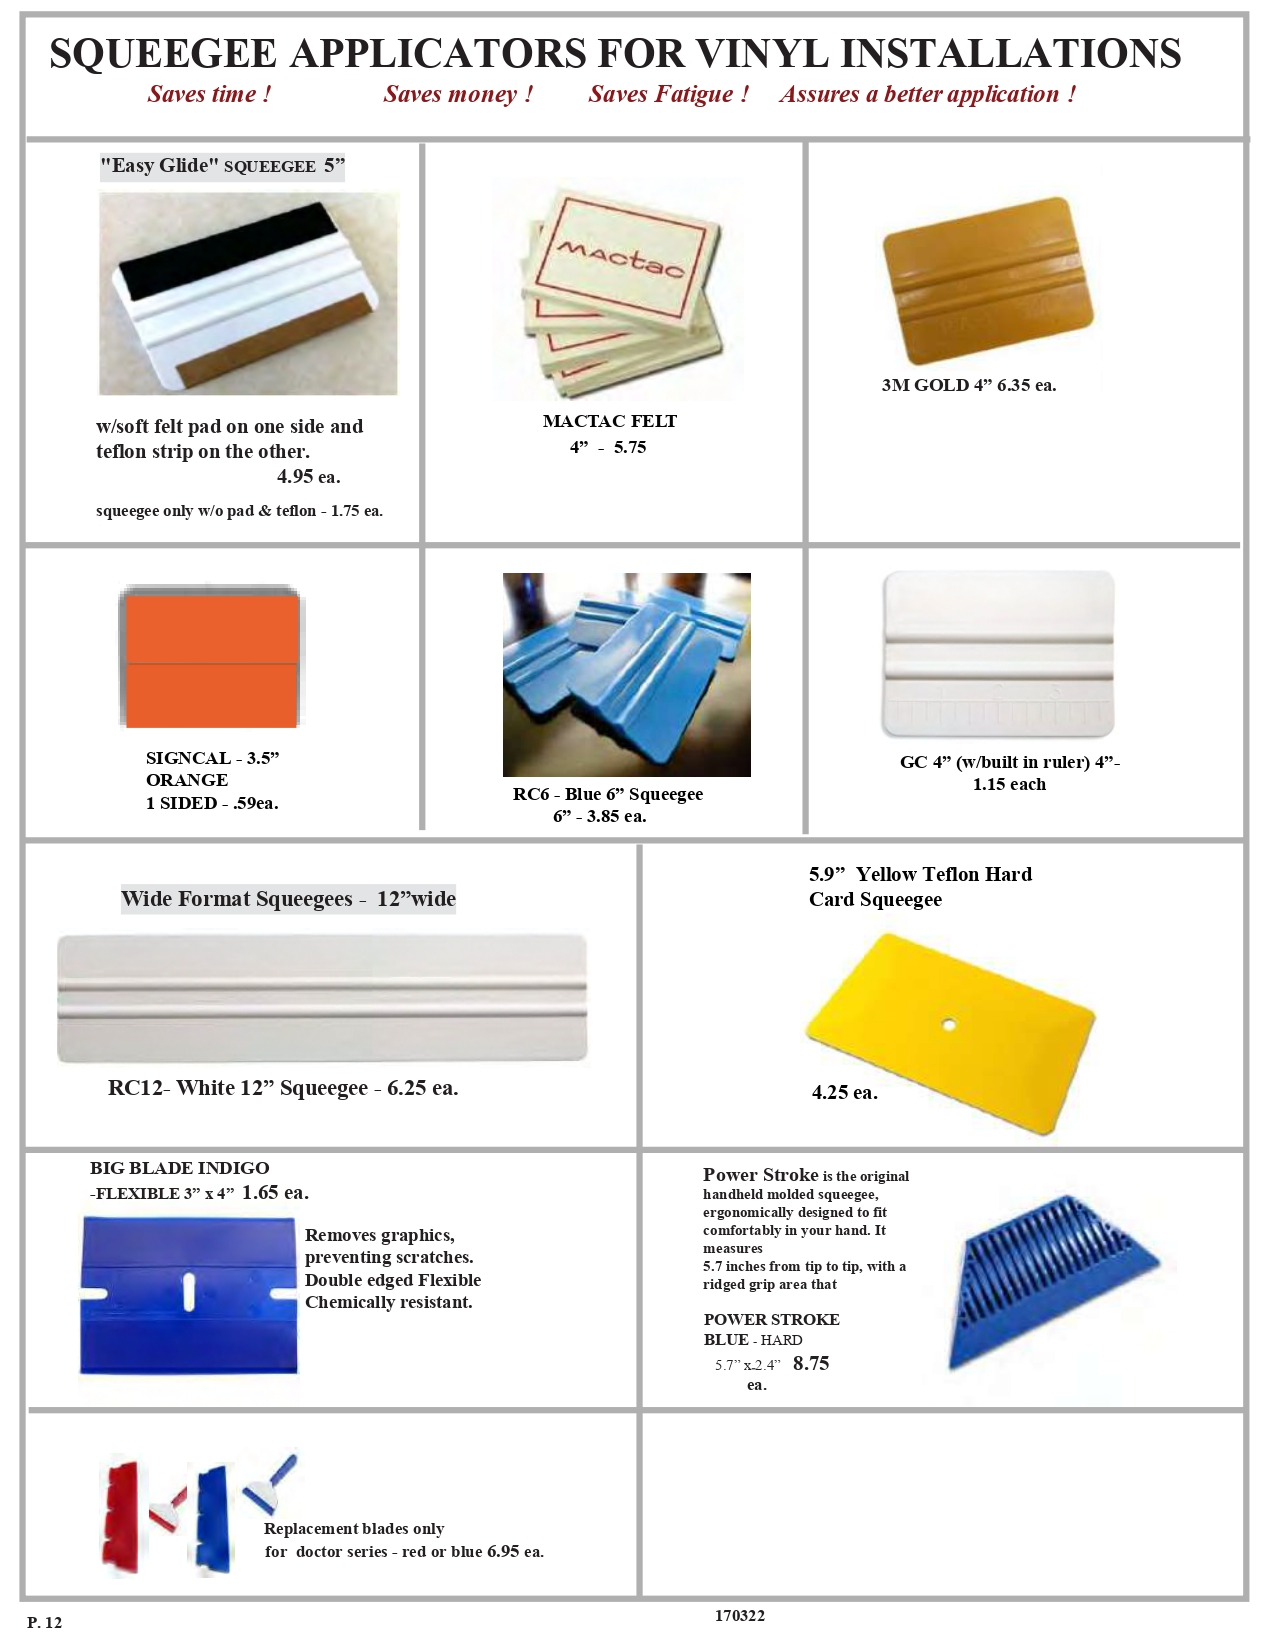 squeegee applic. - Squeegees for Vinyl Application